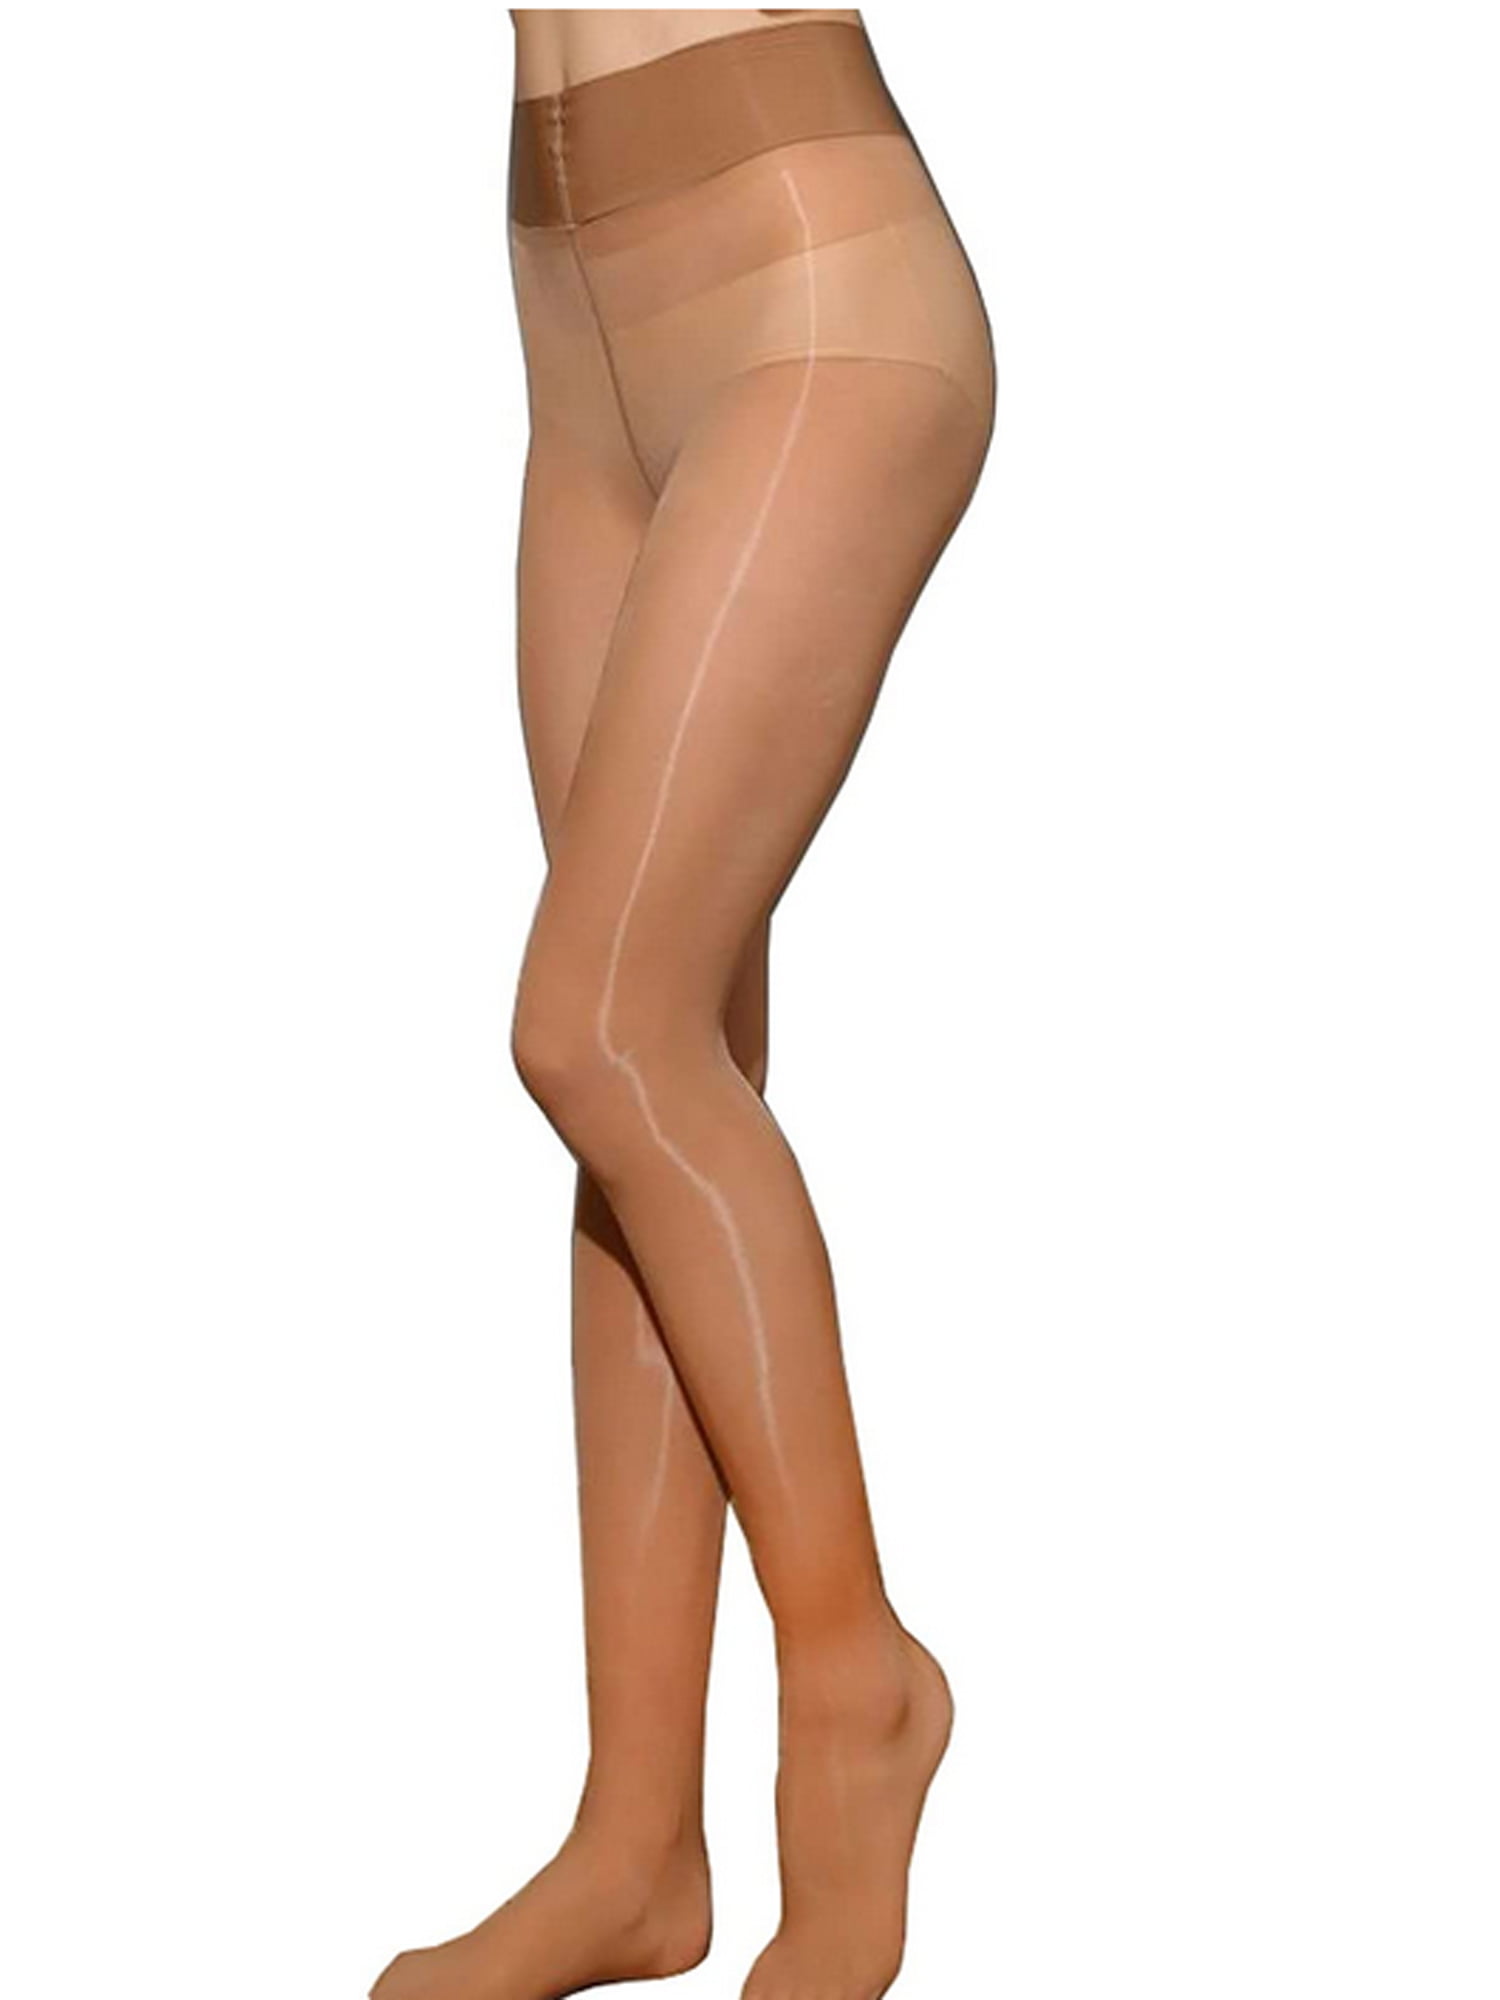 Collant Femme Invisible Deluxe 8 (Beige)